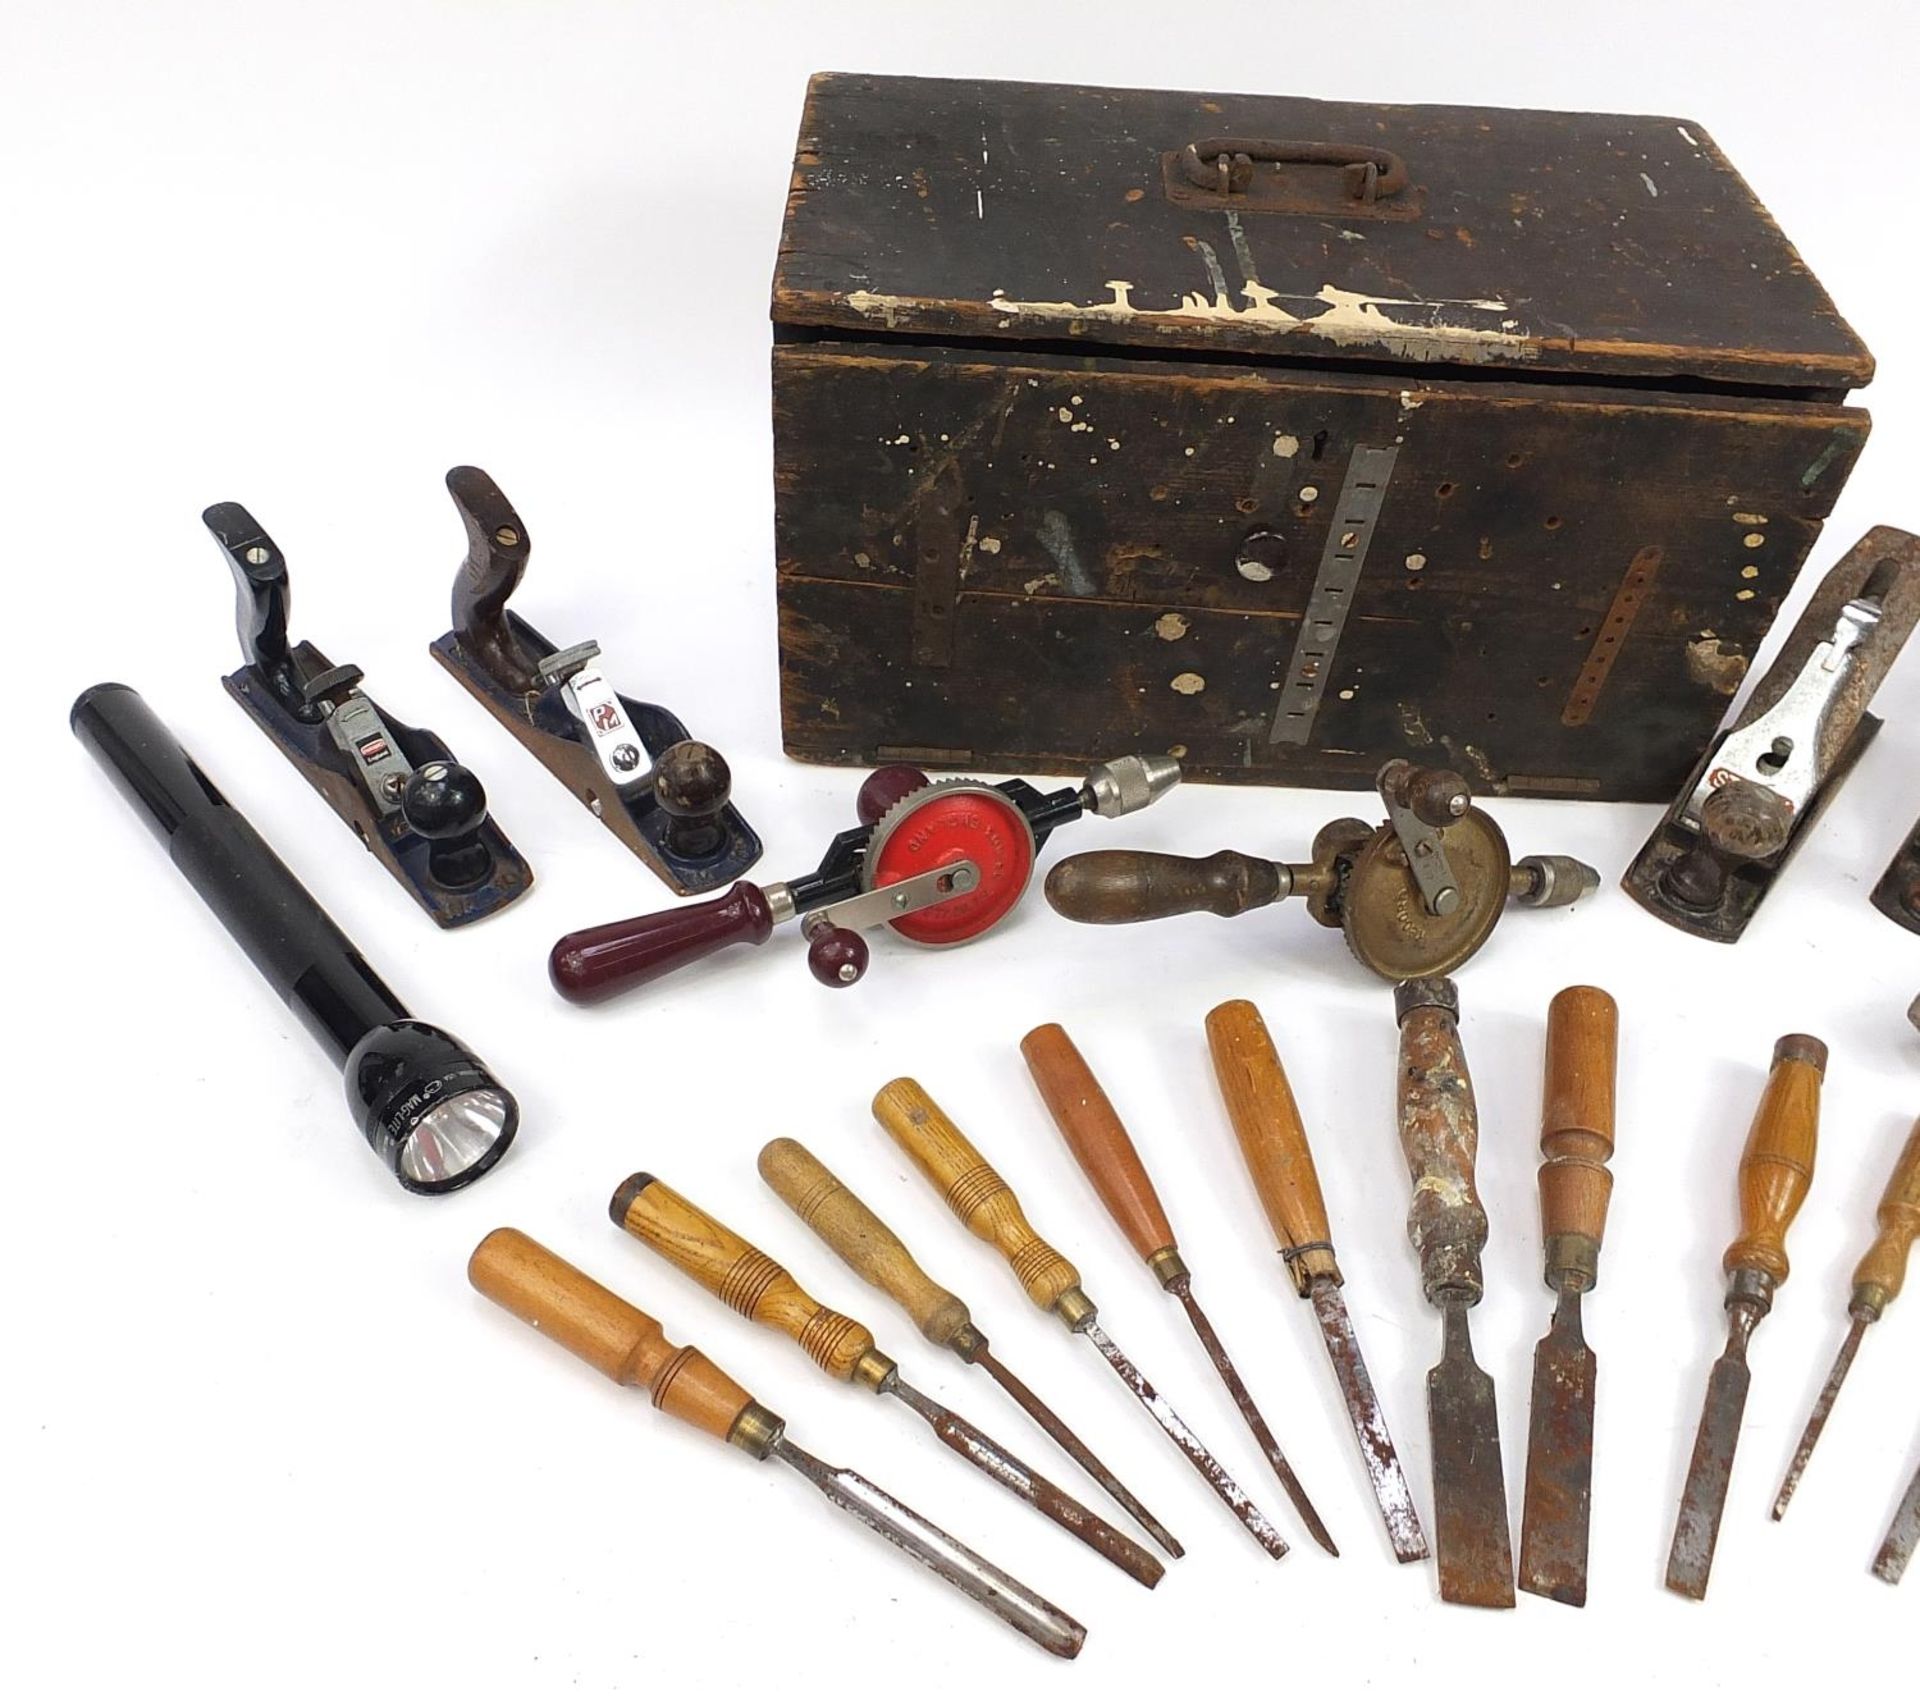 Vintage tools housed in a pine chest including chisels, wood planes and hand drills, the chest - Bild 2 aus 3